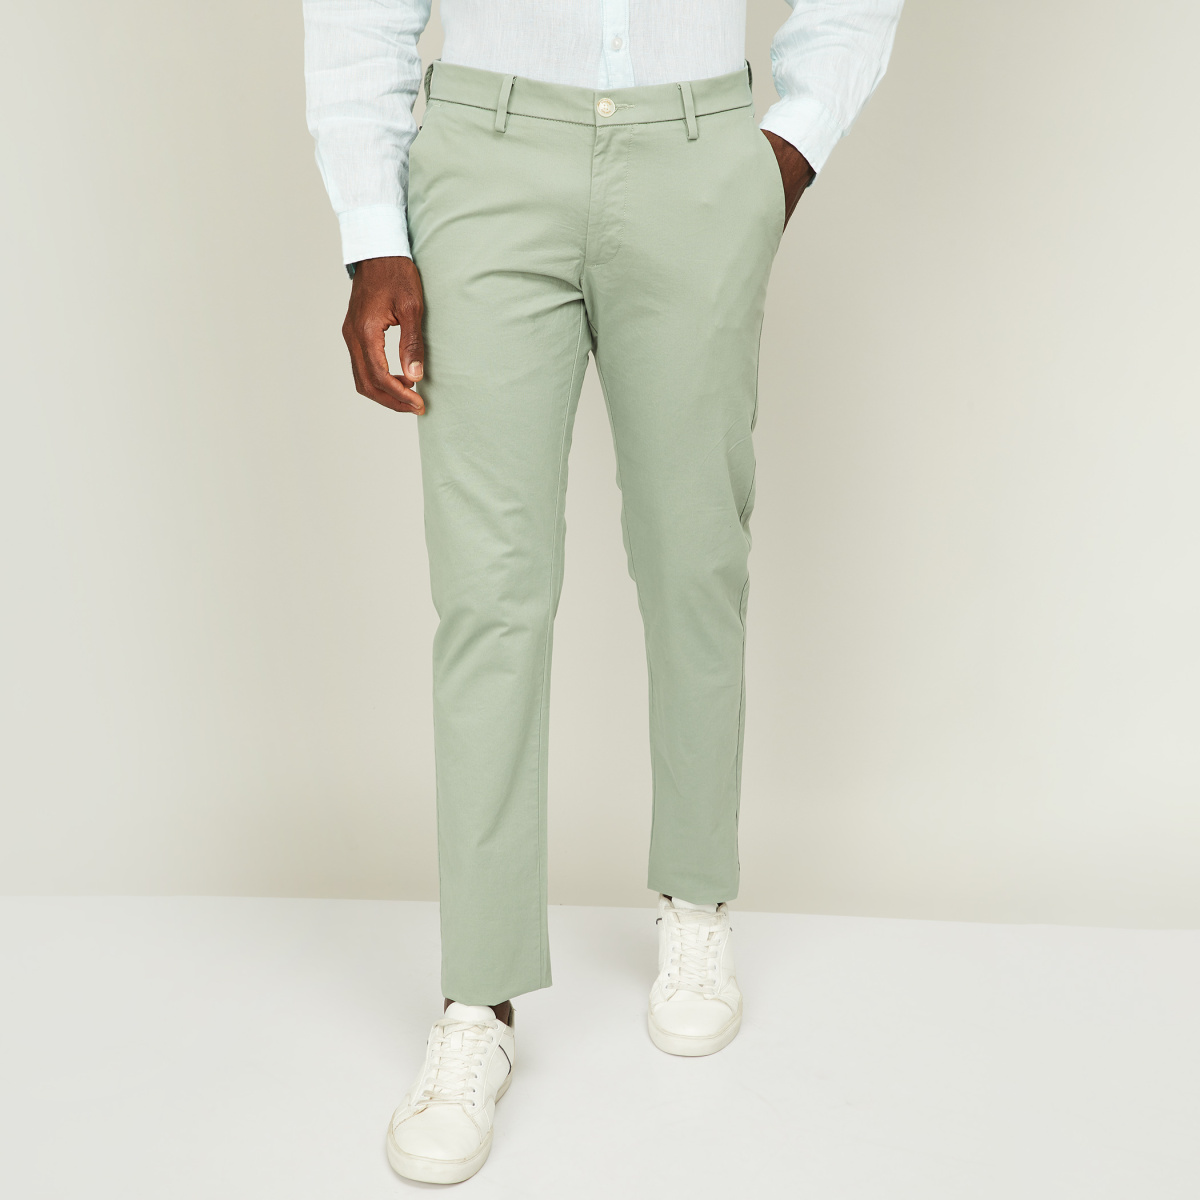 Buy Allen Solly Men White Regular Fit Solid Casual Trousers online